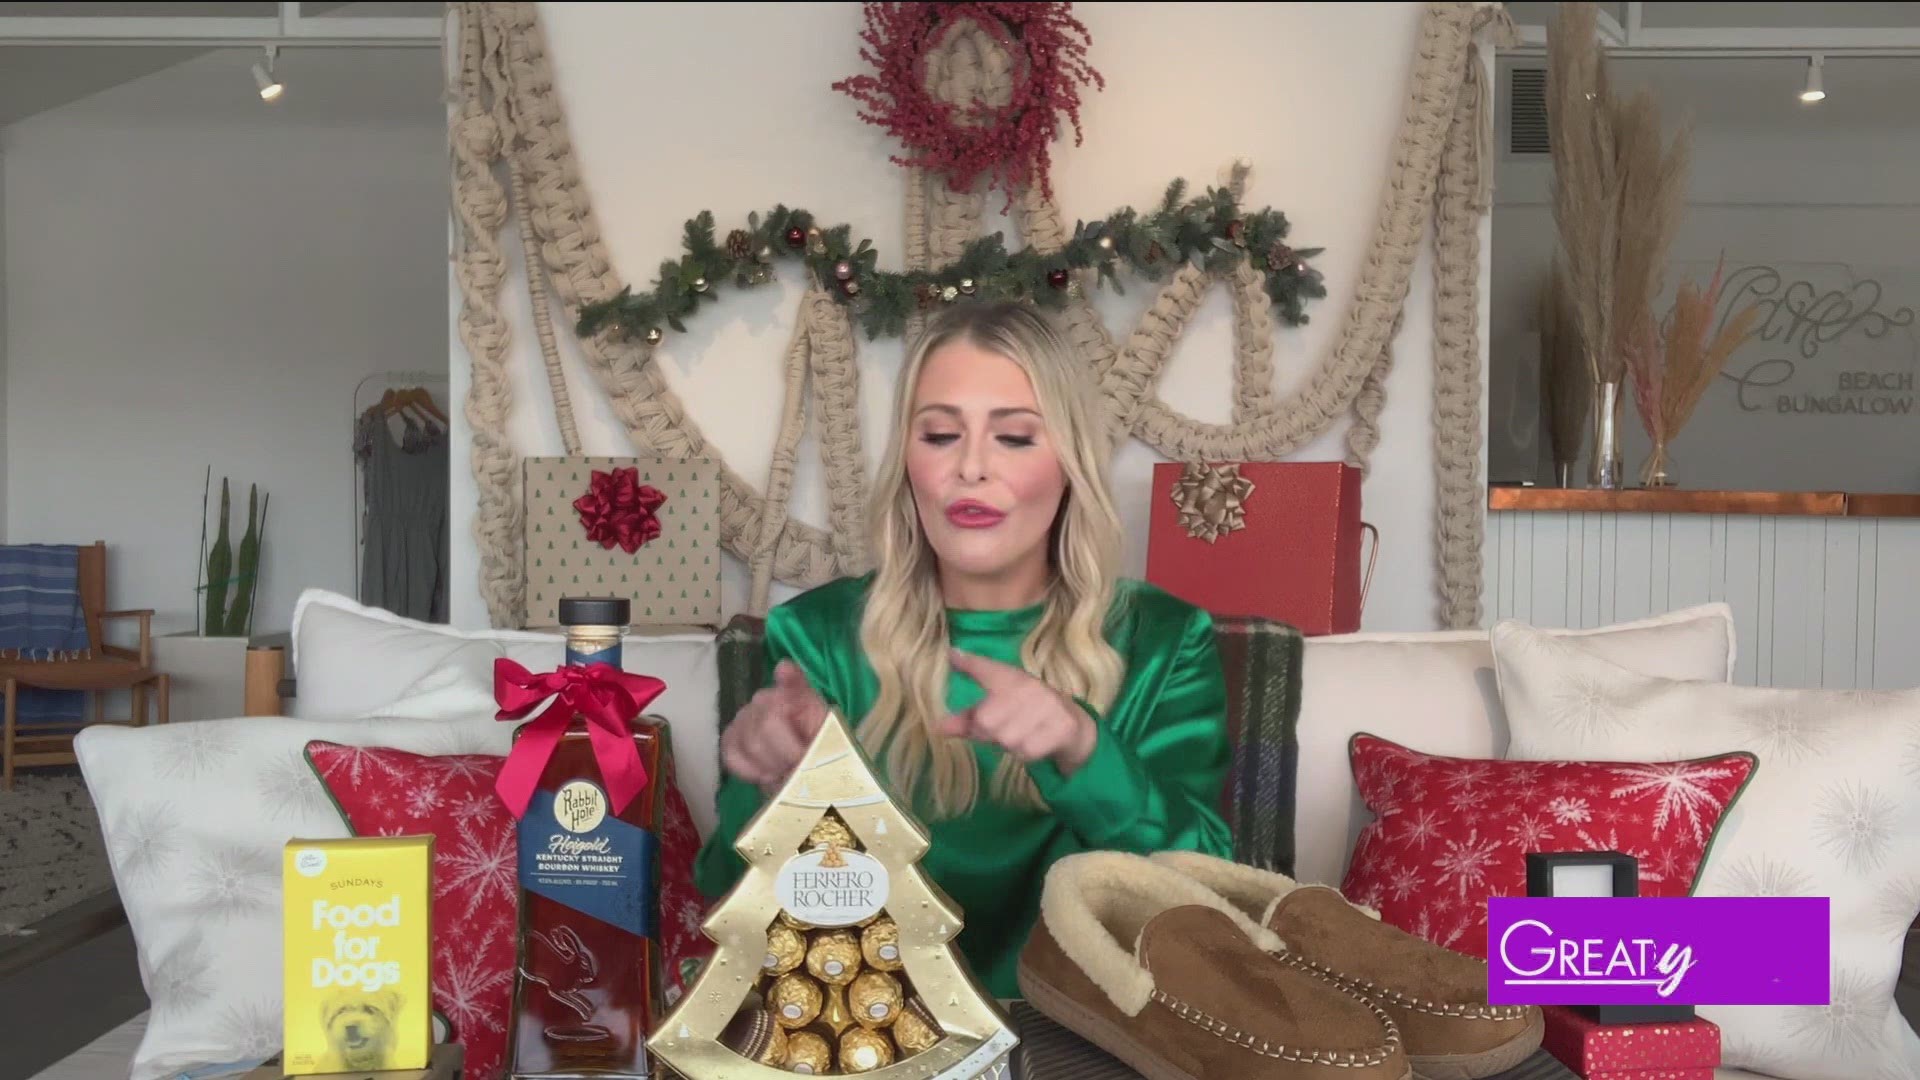 If you're struggling to find holiday gift inspiration, Saddie Murray shares her top gift ideas for this holiday season.